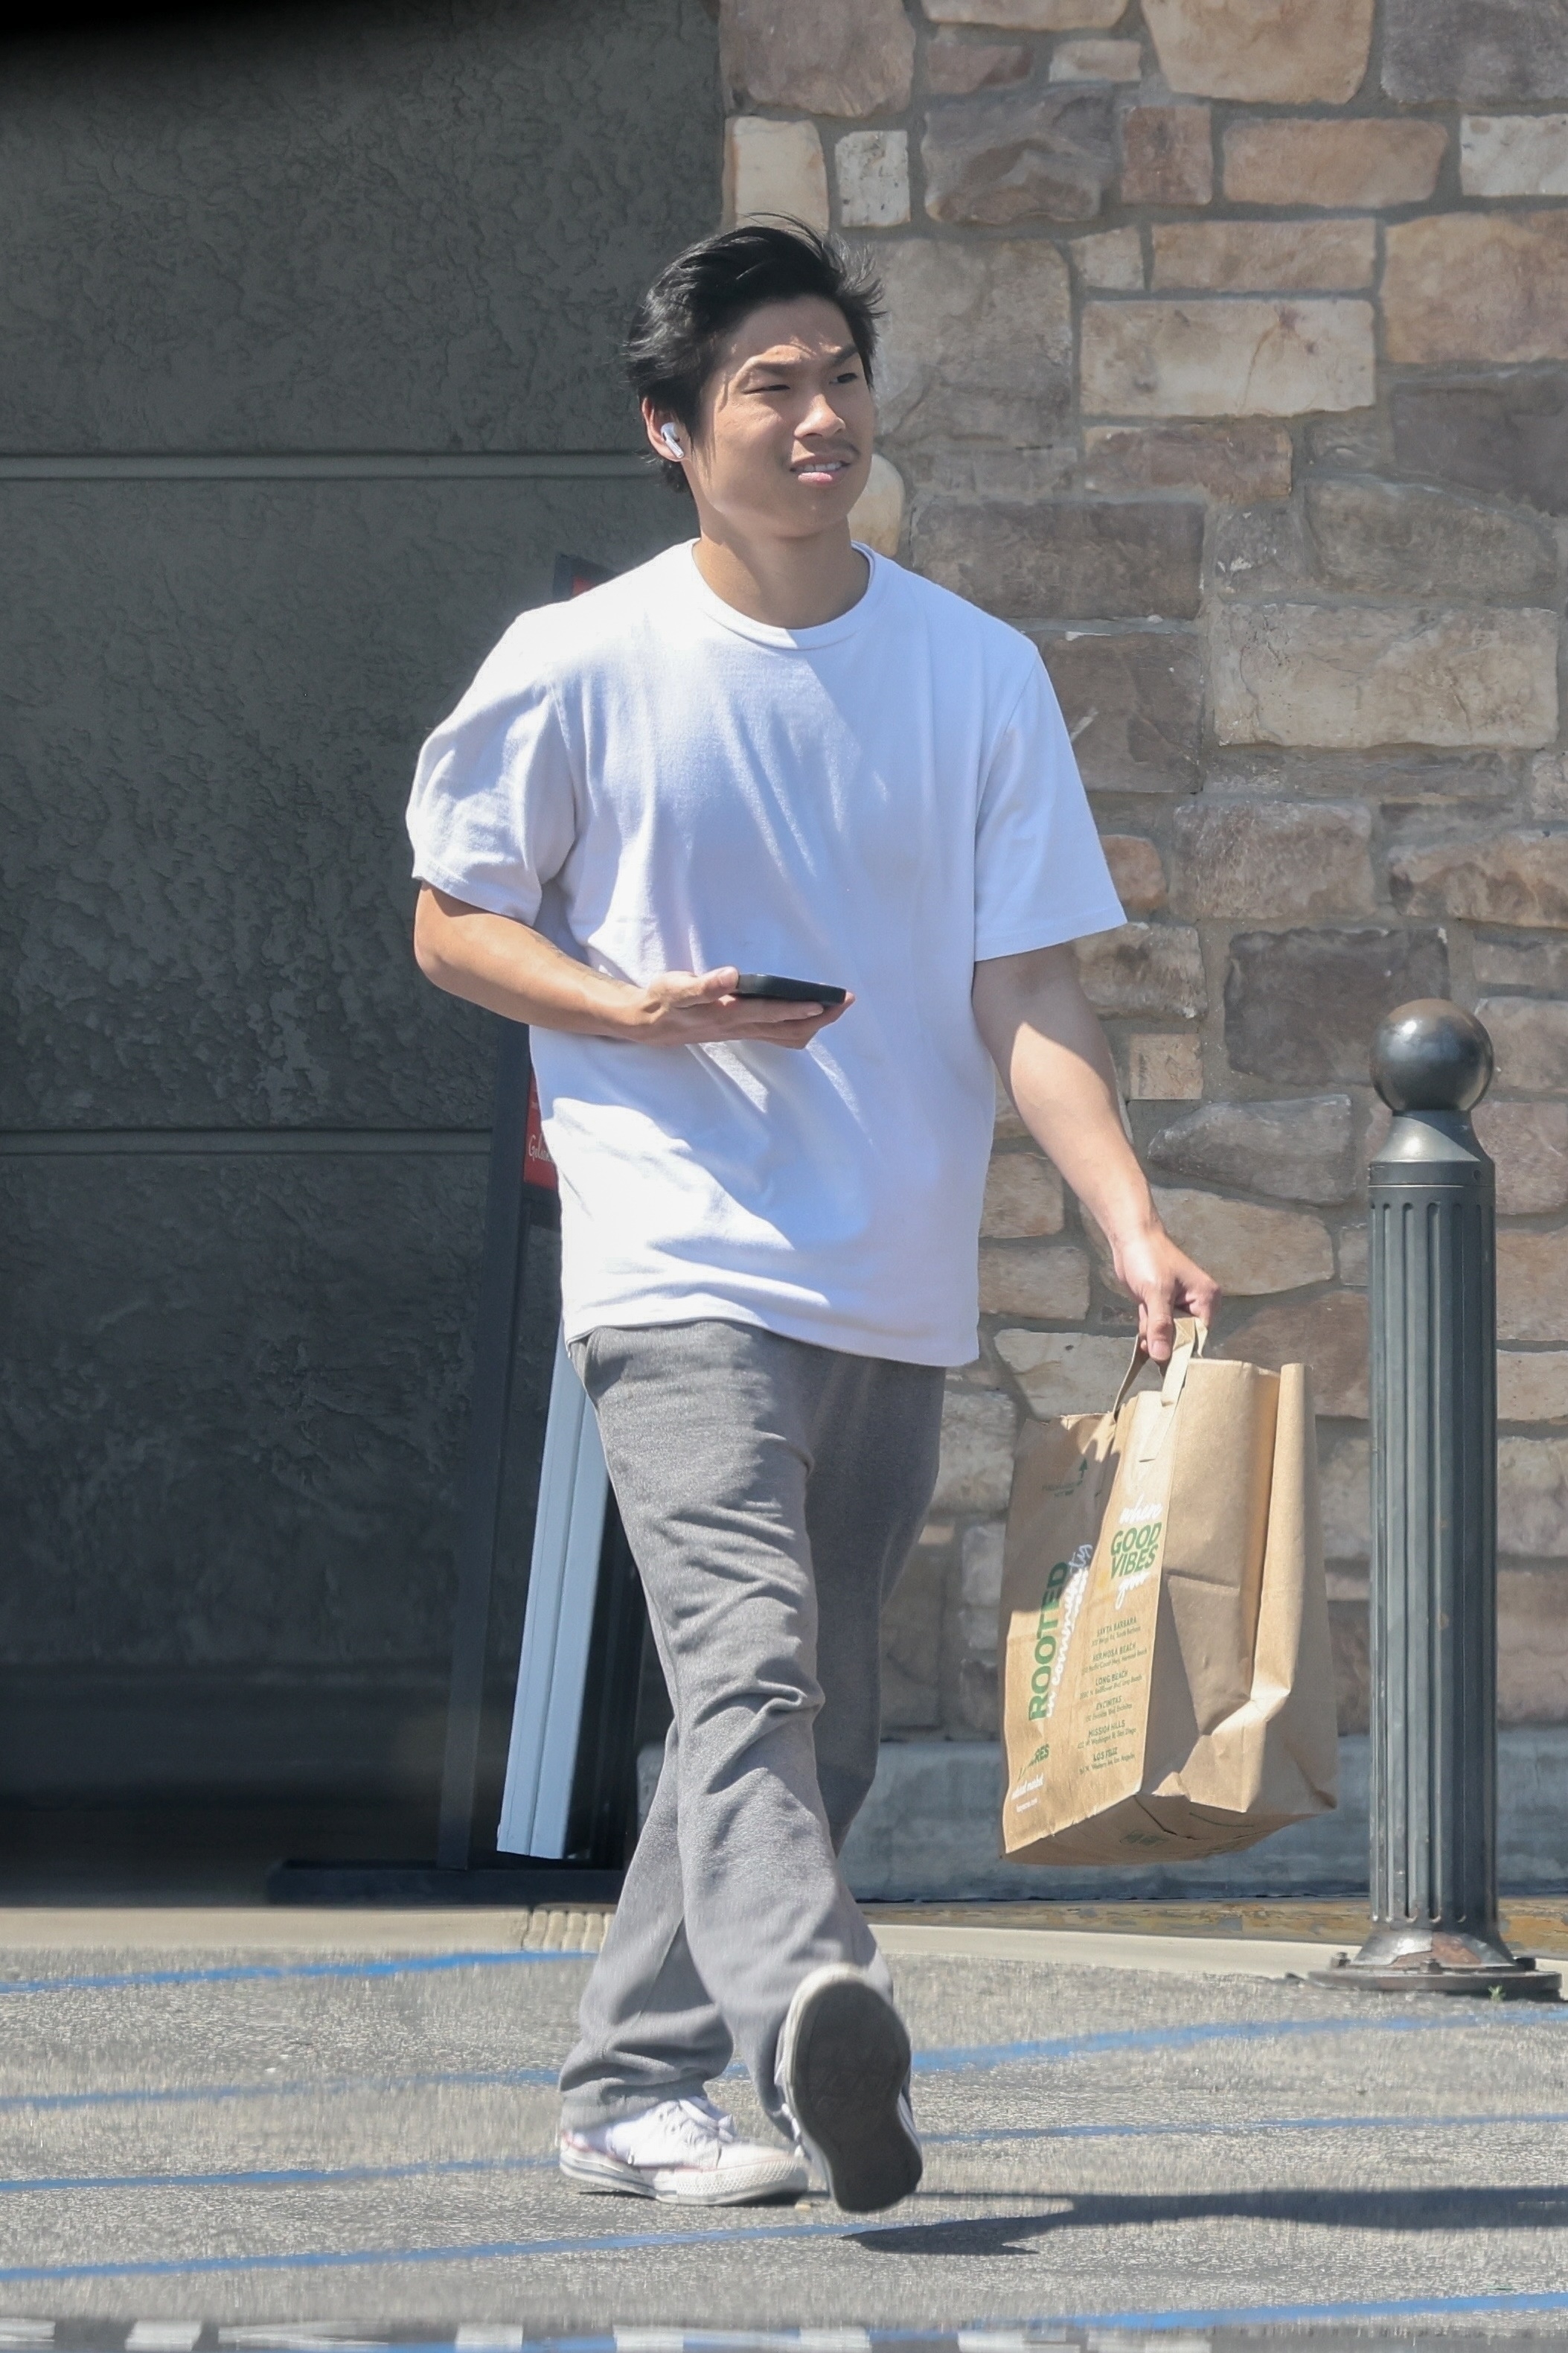 He flashed a smile in a baggy outfit while brisky picking up groceries